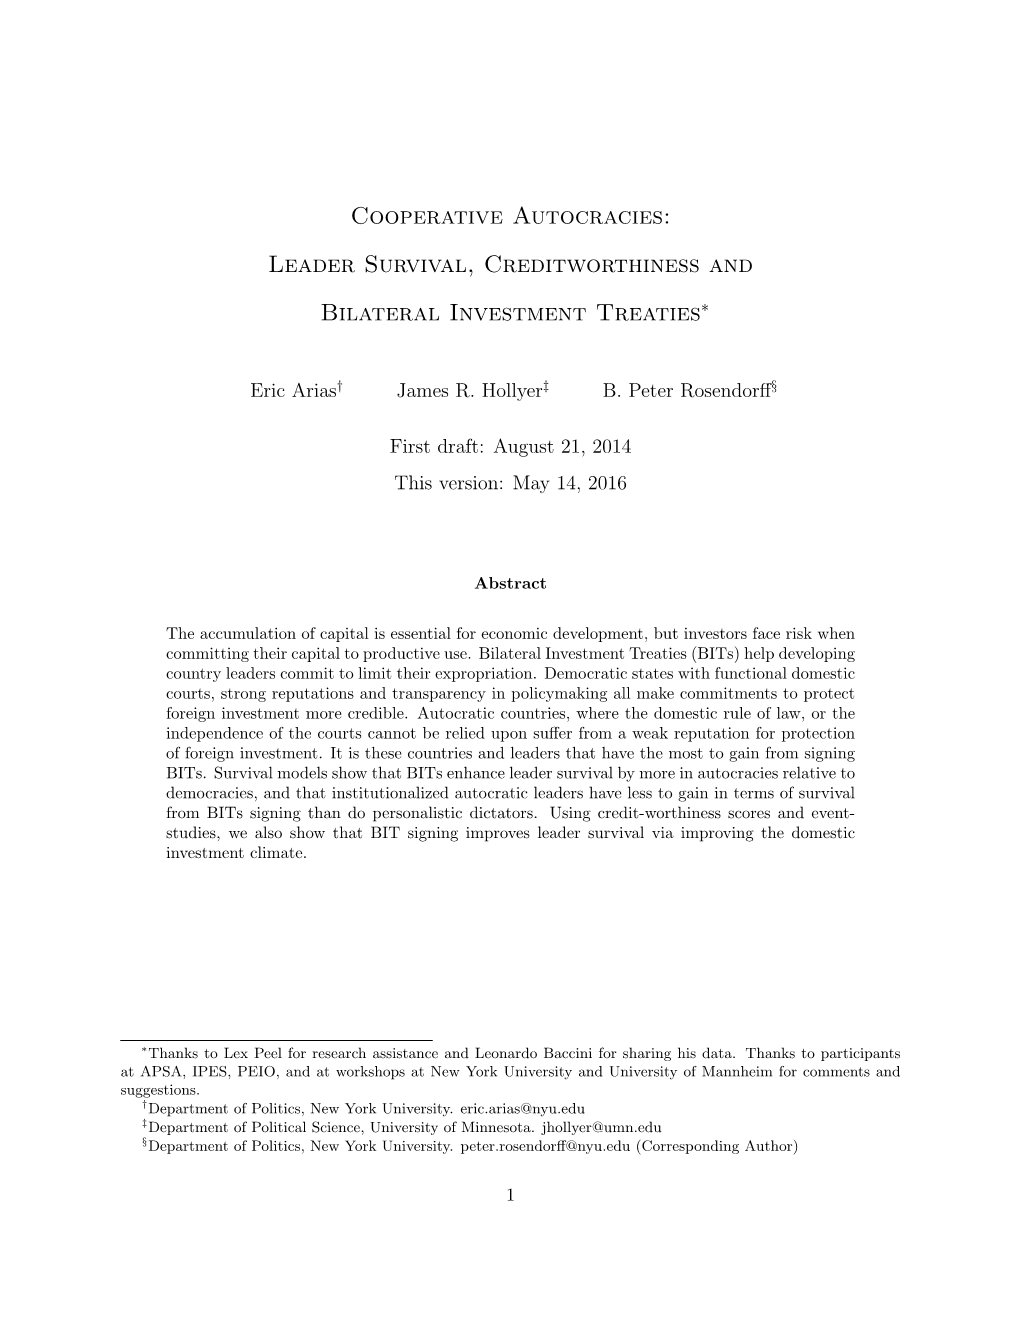 Cooperative Autocracies: Leader Survival, Creditworthiness And